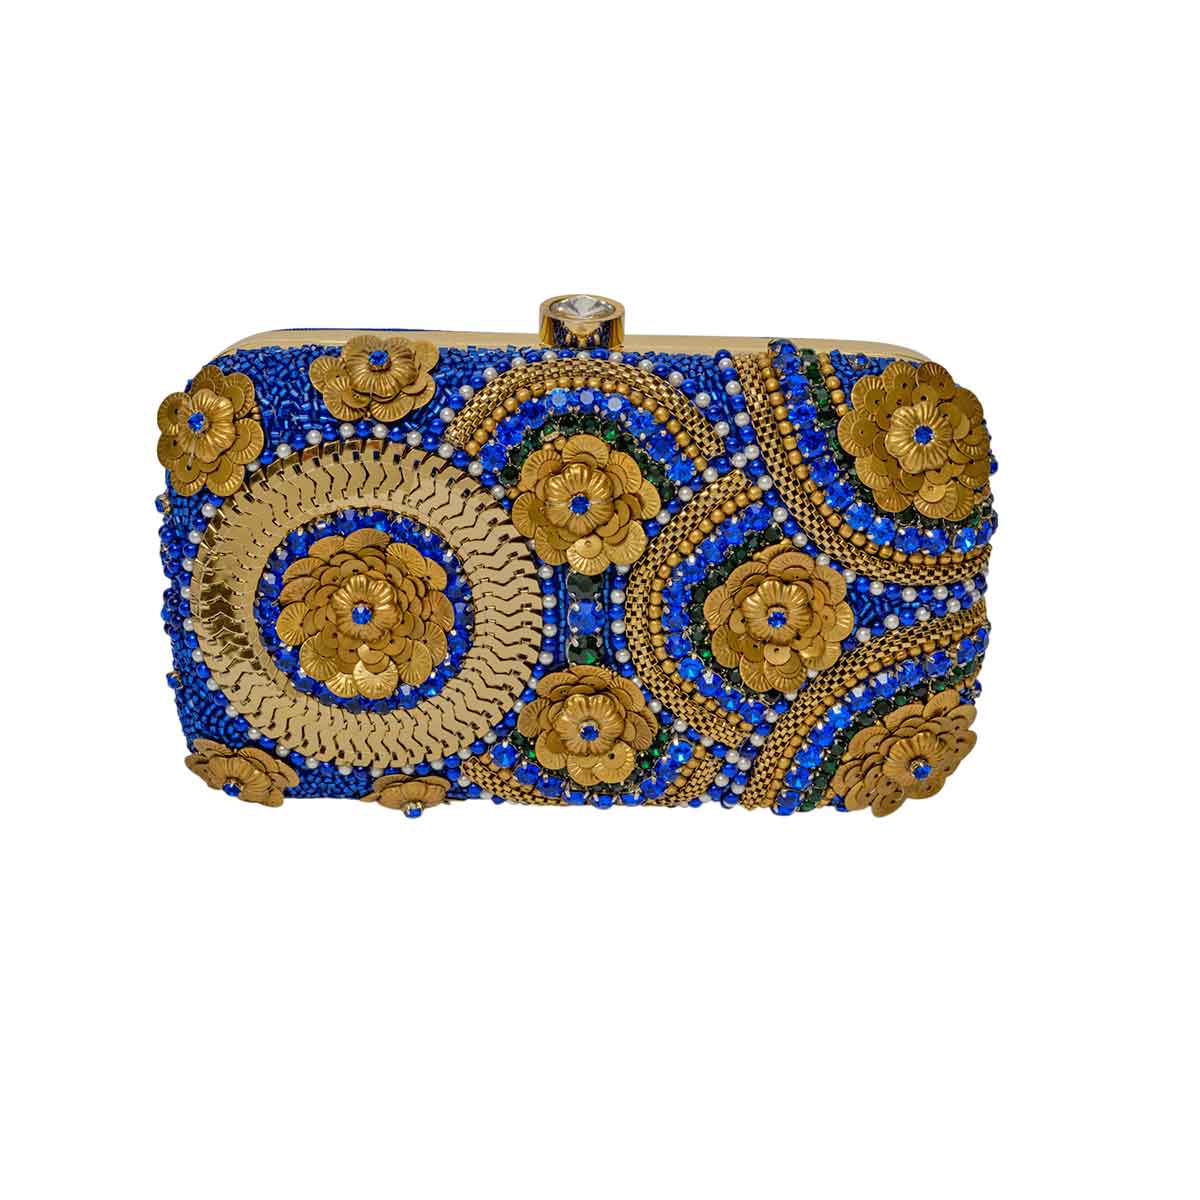 Blue and gold clutch with big stone clasp lock. Aelia Clutch from Rani Collection by Veronica Tharmalingam